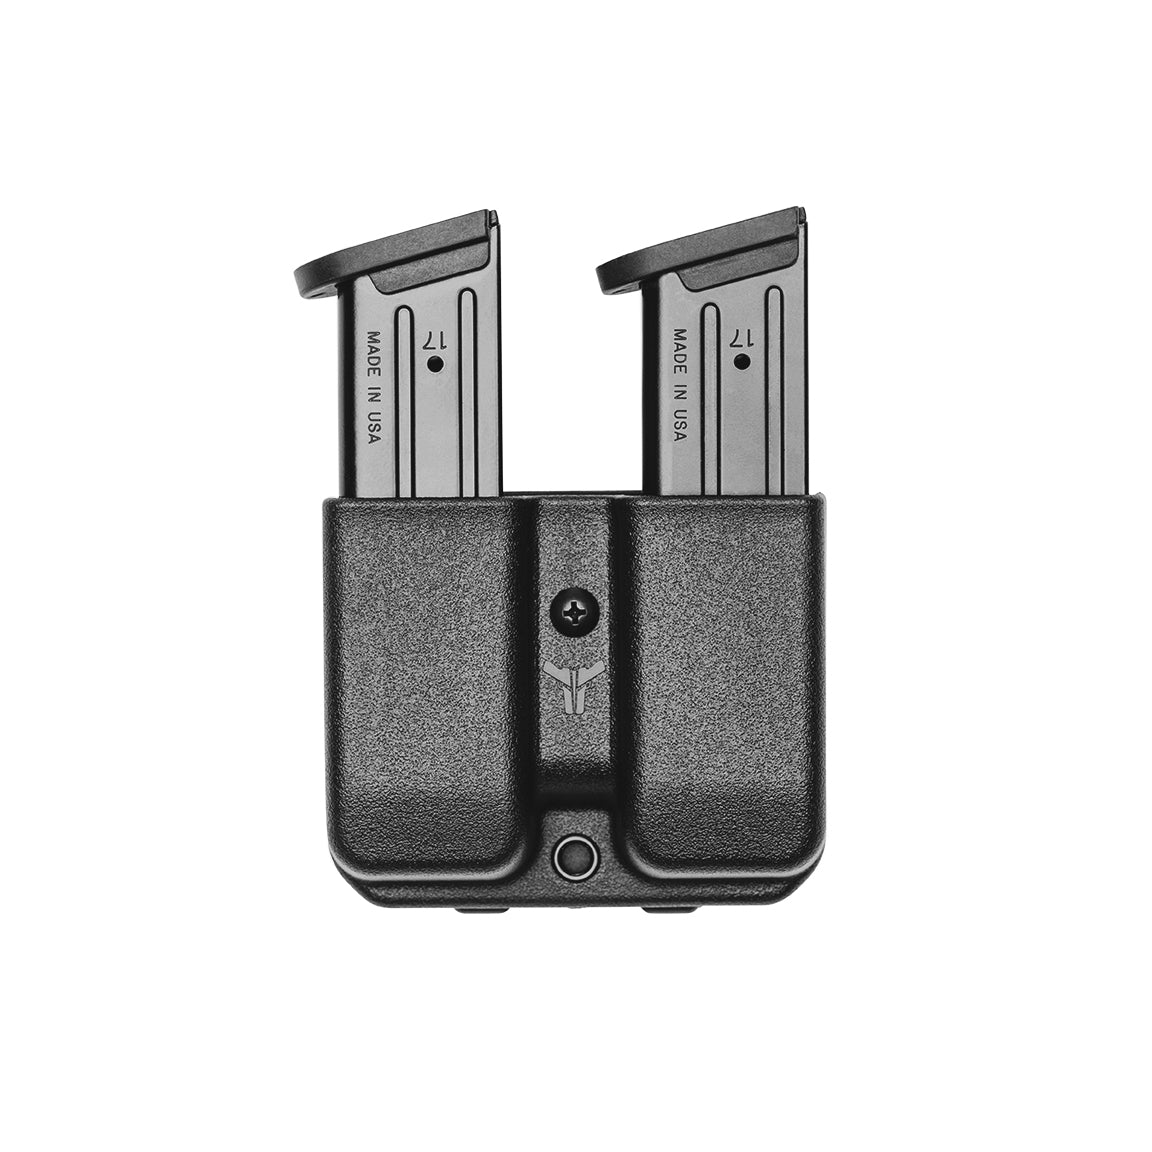 Buy Double Mag Case - Single Stack - 9 mm/10mm/.40 Cal/.45 Cal And